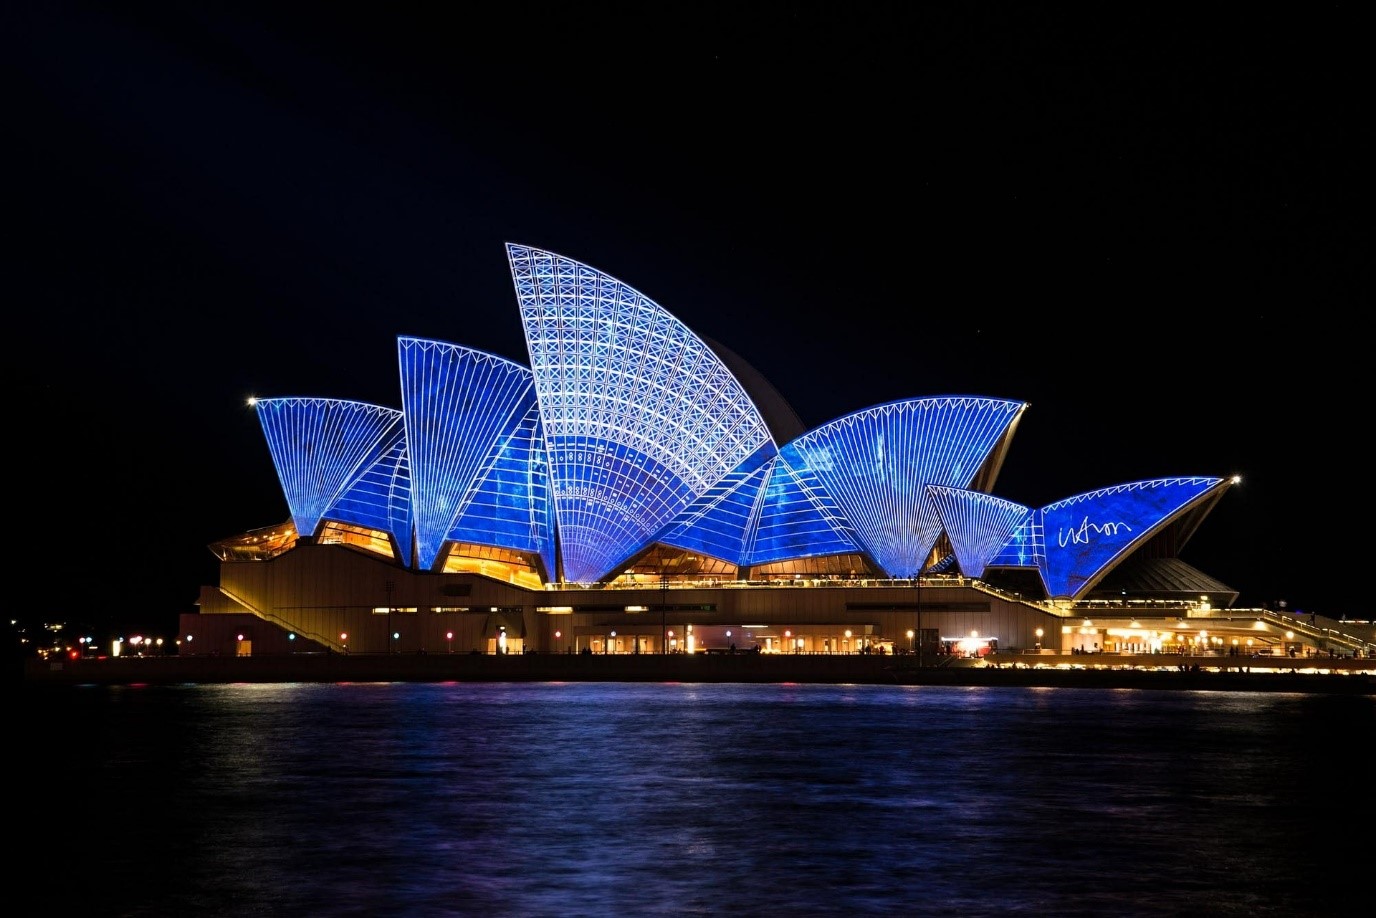 A panoramic view of Sydney Opera House lit up in patterned blue lights